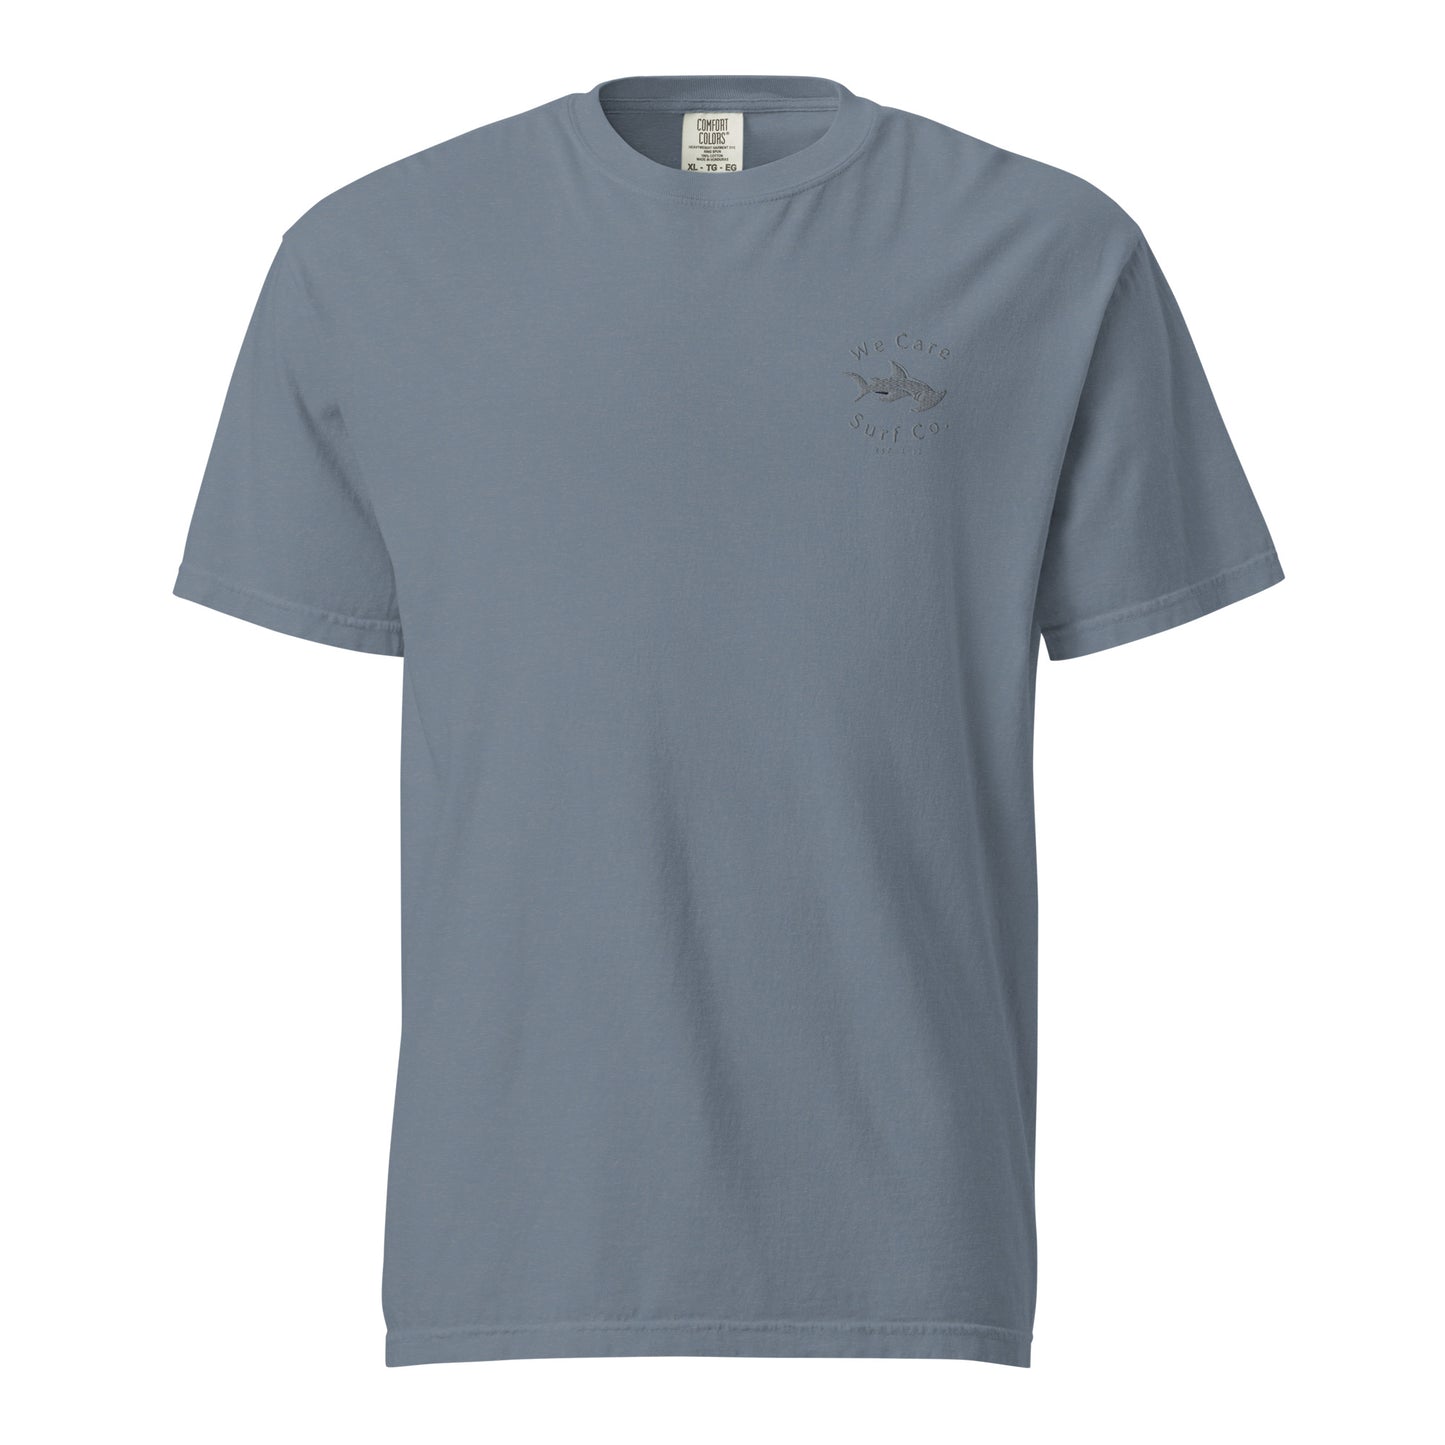 Free Swimming Men's Embroidered Tee